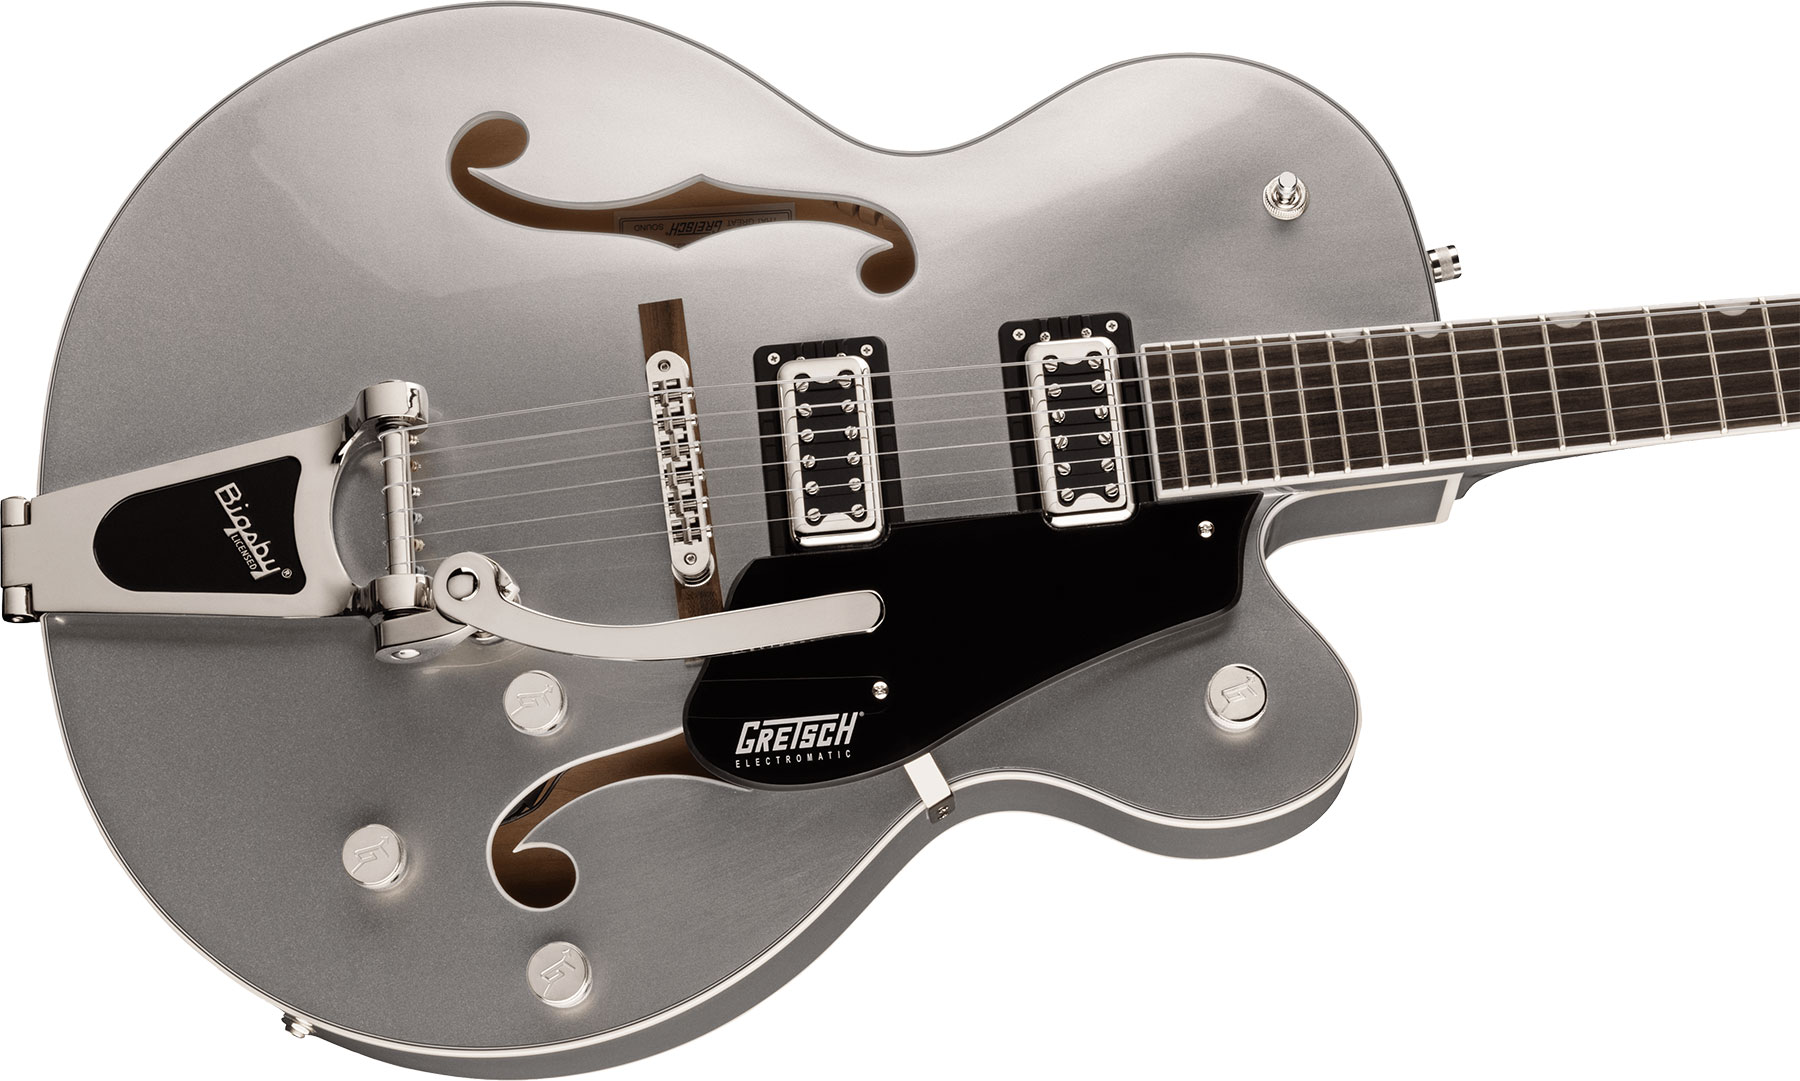 Gretsch G5420t Classic Electromatic Hollow Body Hh Trem Bigsby Lau - Airline Silver - Semi-hollow electric guitar - Variation 2